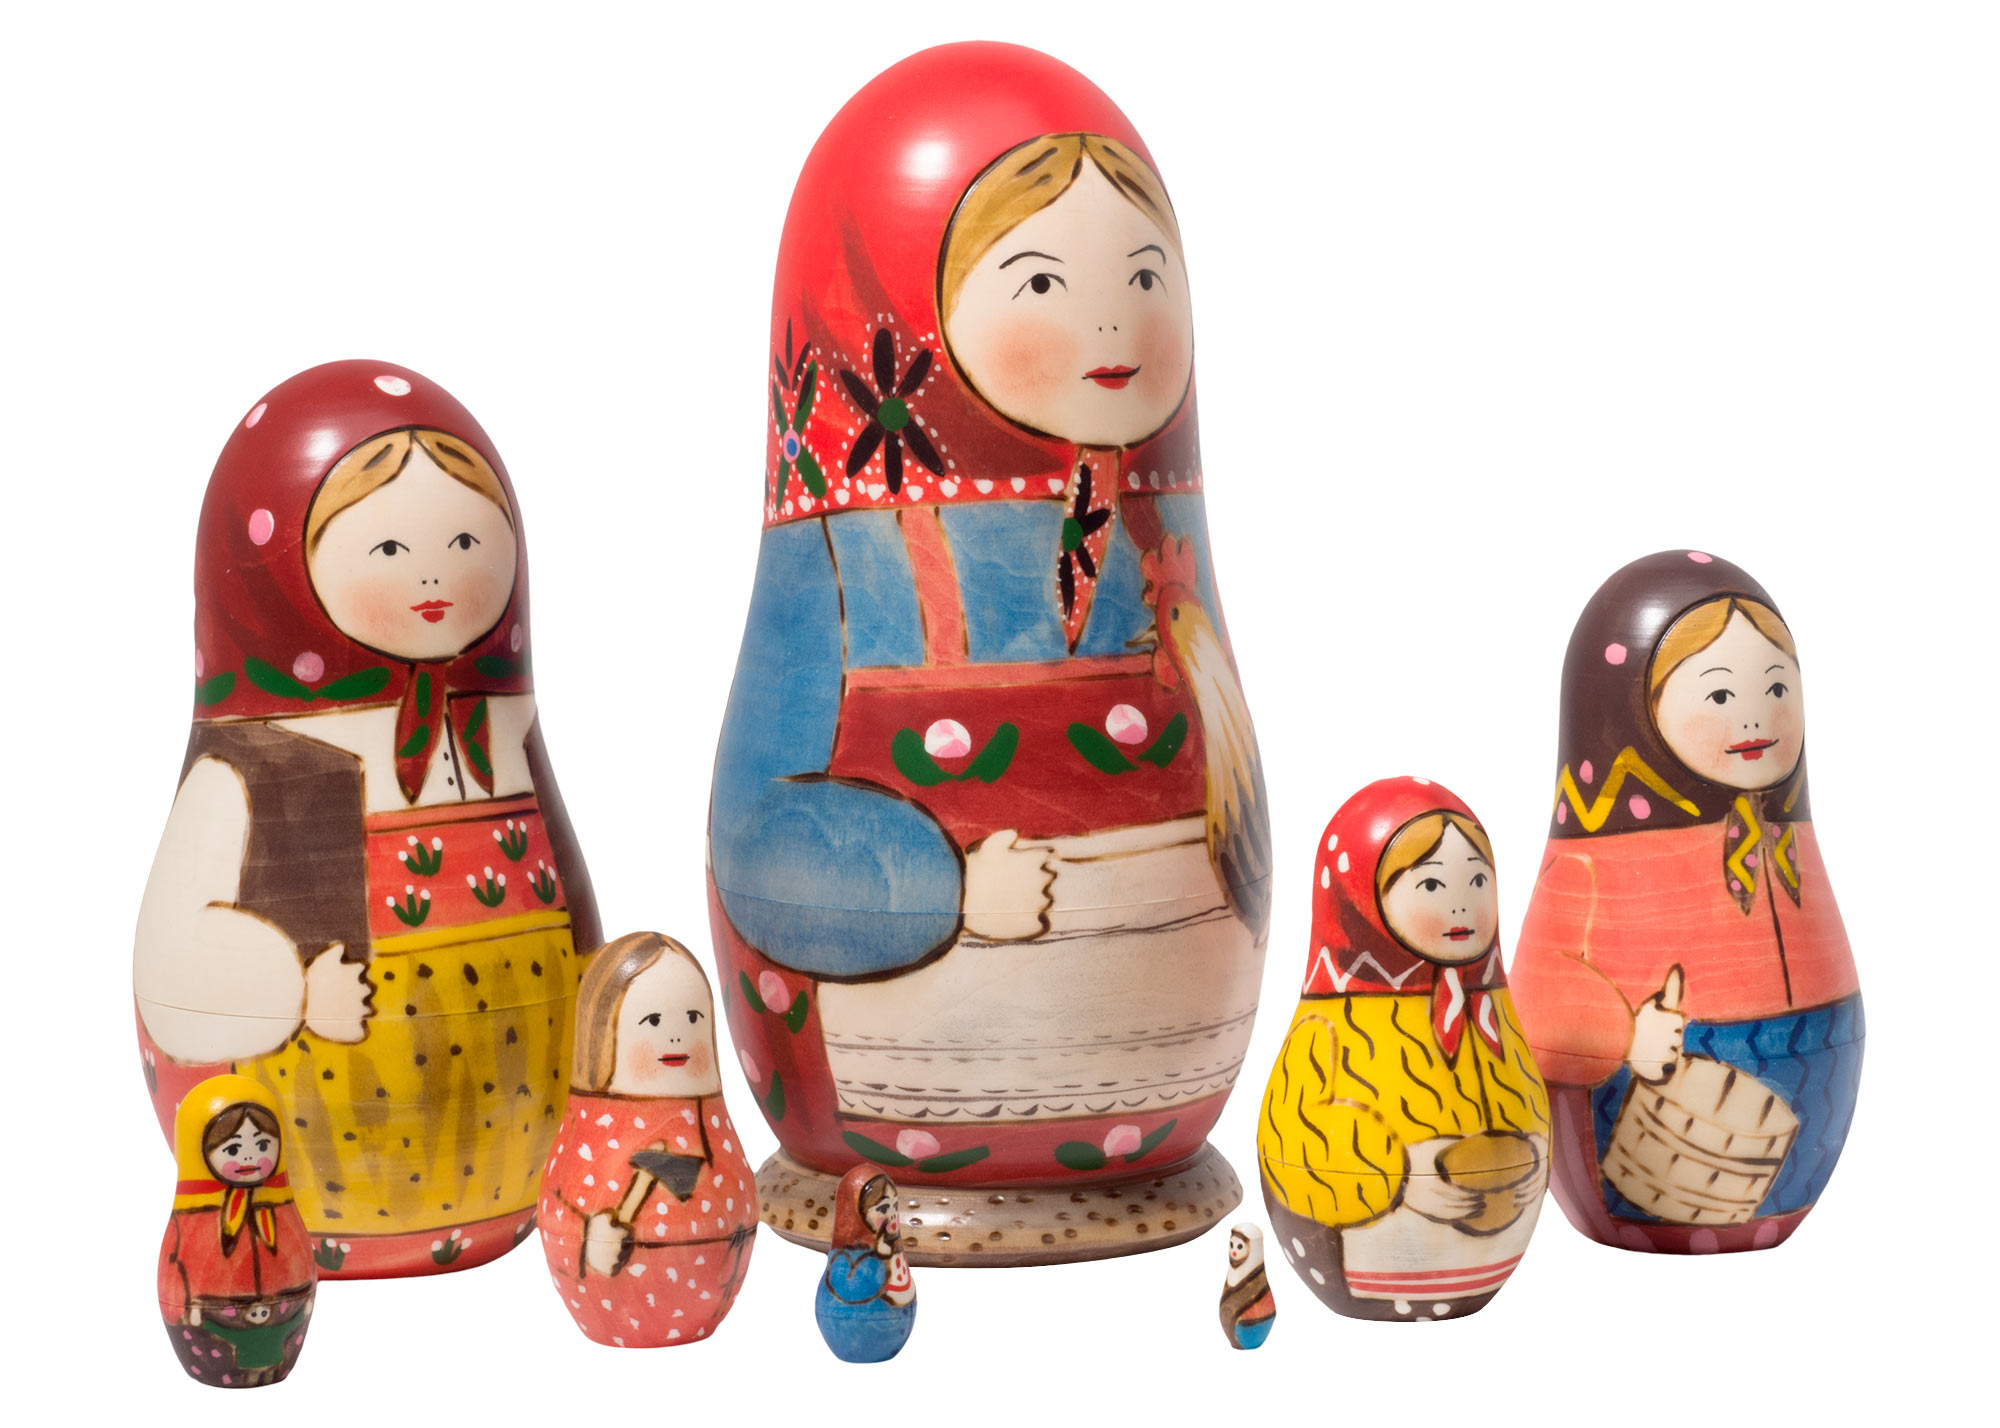 Buy Peasant Matriarch Doll 8pc./7" - The First Nesting Doll at GoldenCockerel.com